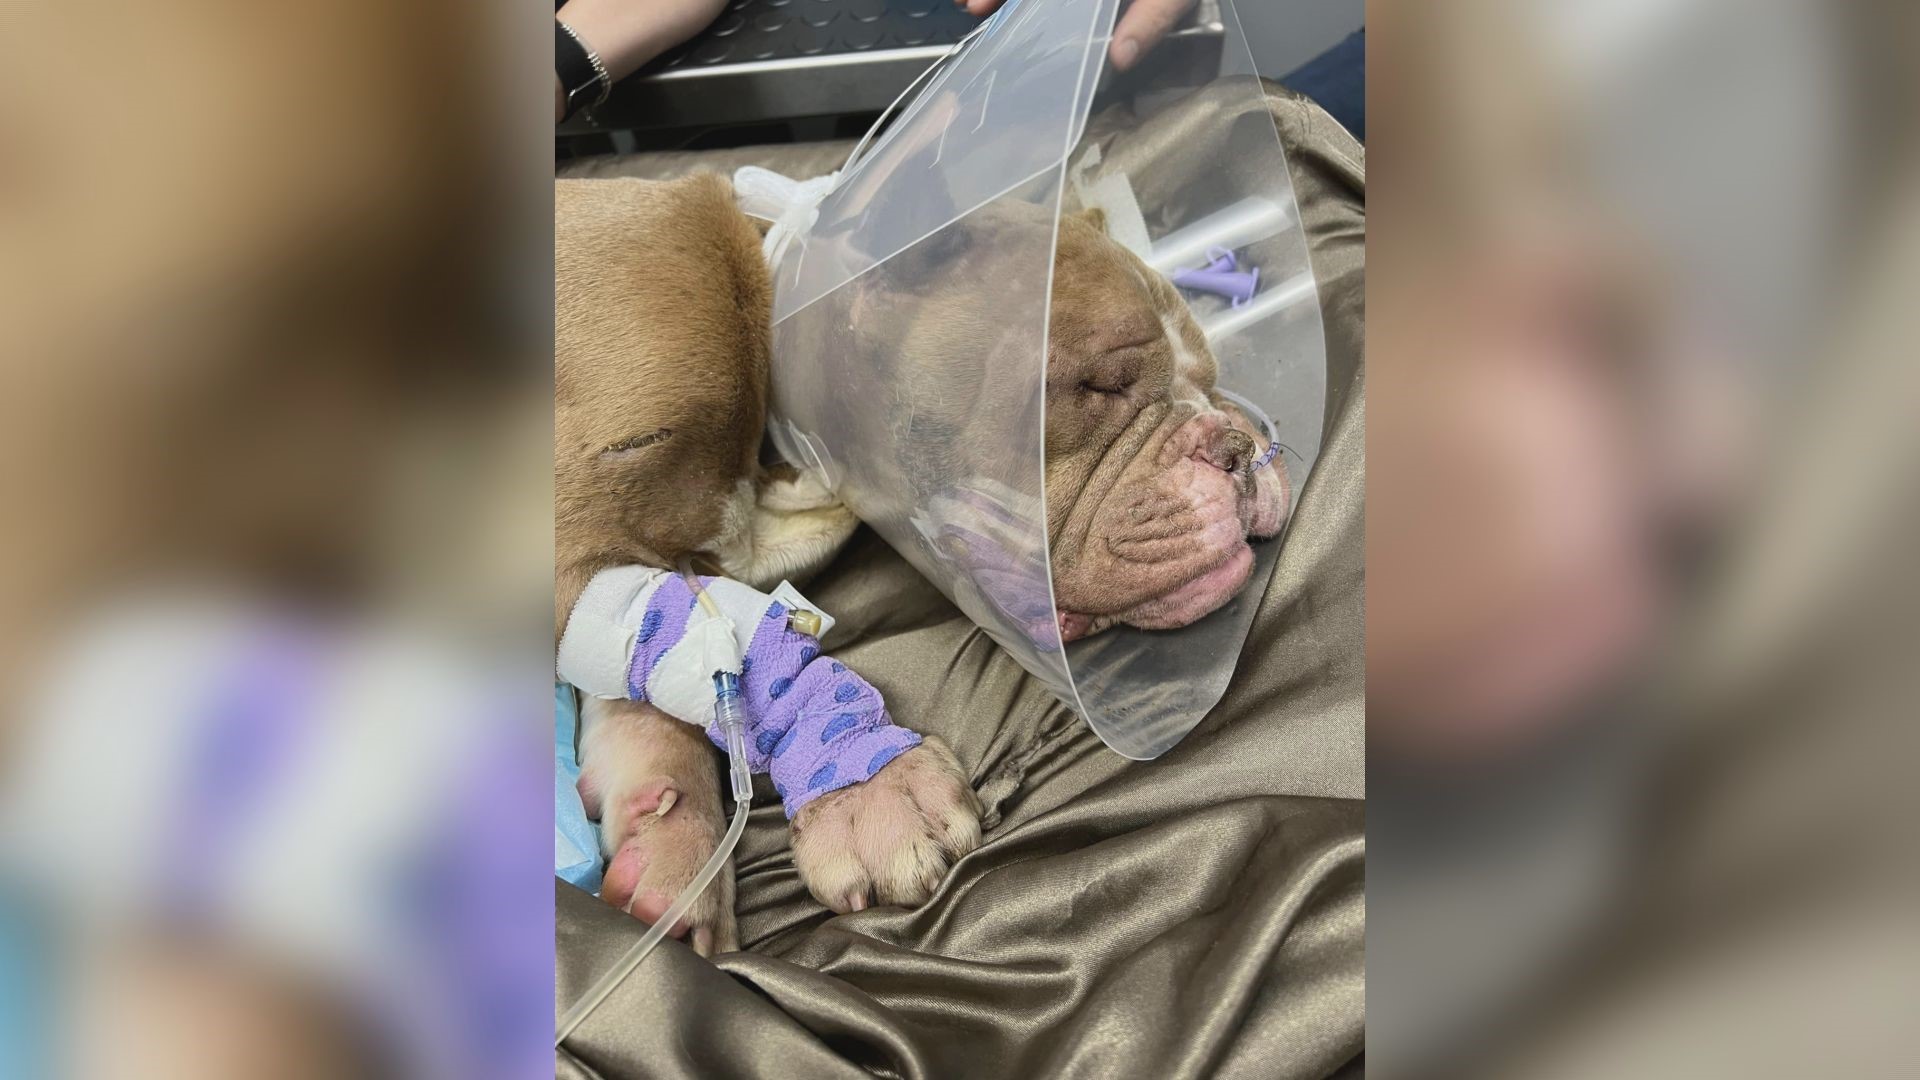 A detective with the East Grand Rapids Police Department tells 13 ON YOUR SIDE they'll be turning the case over to Kent County Animal Control.